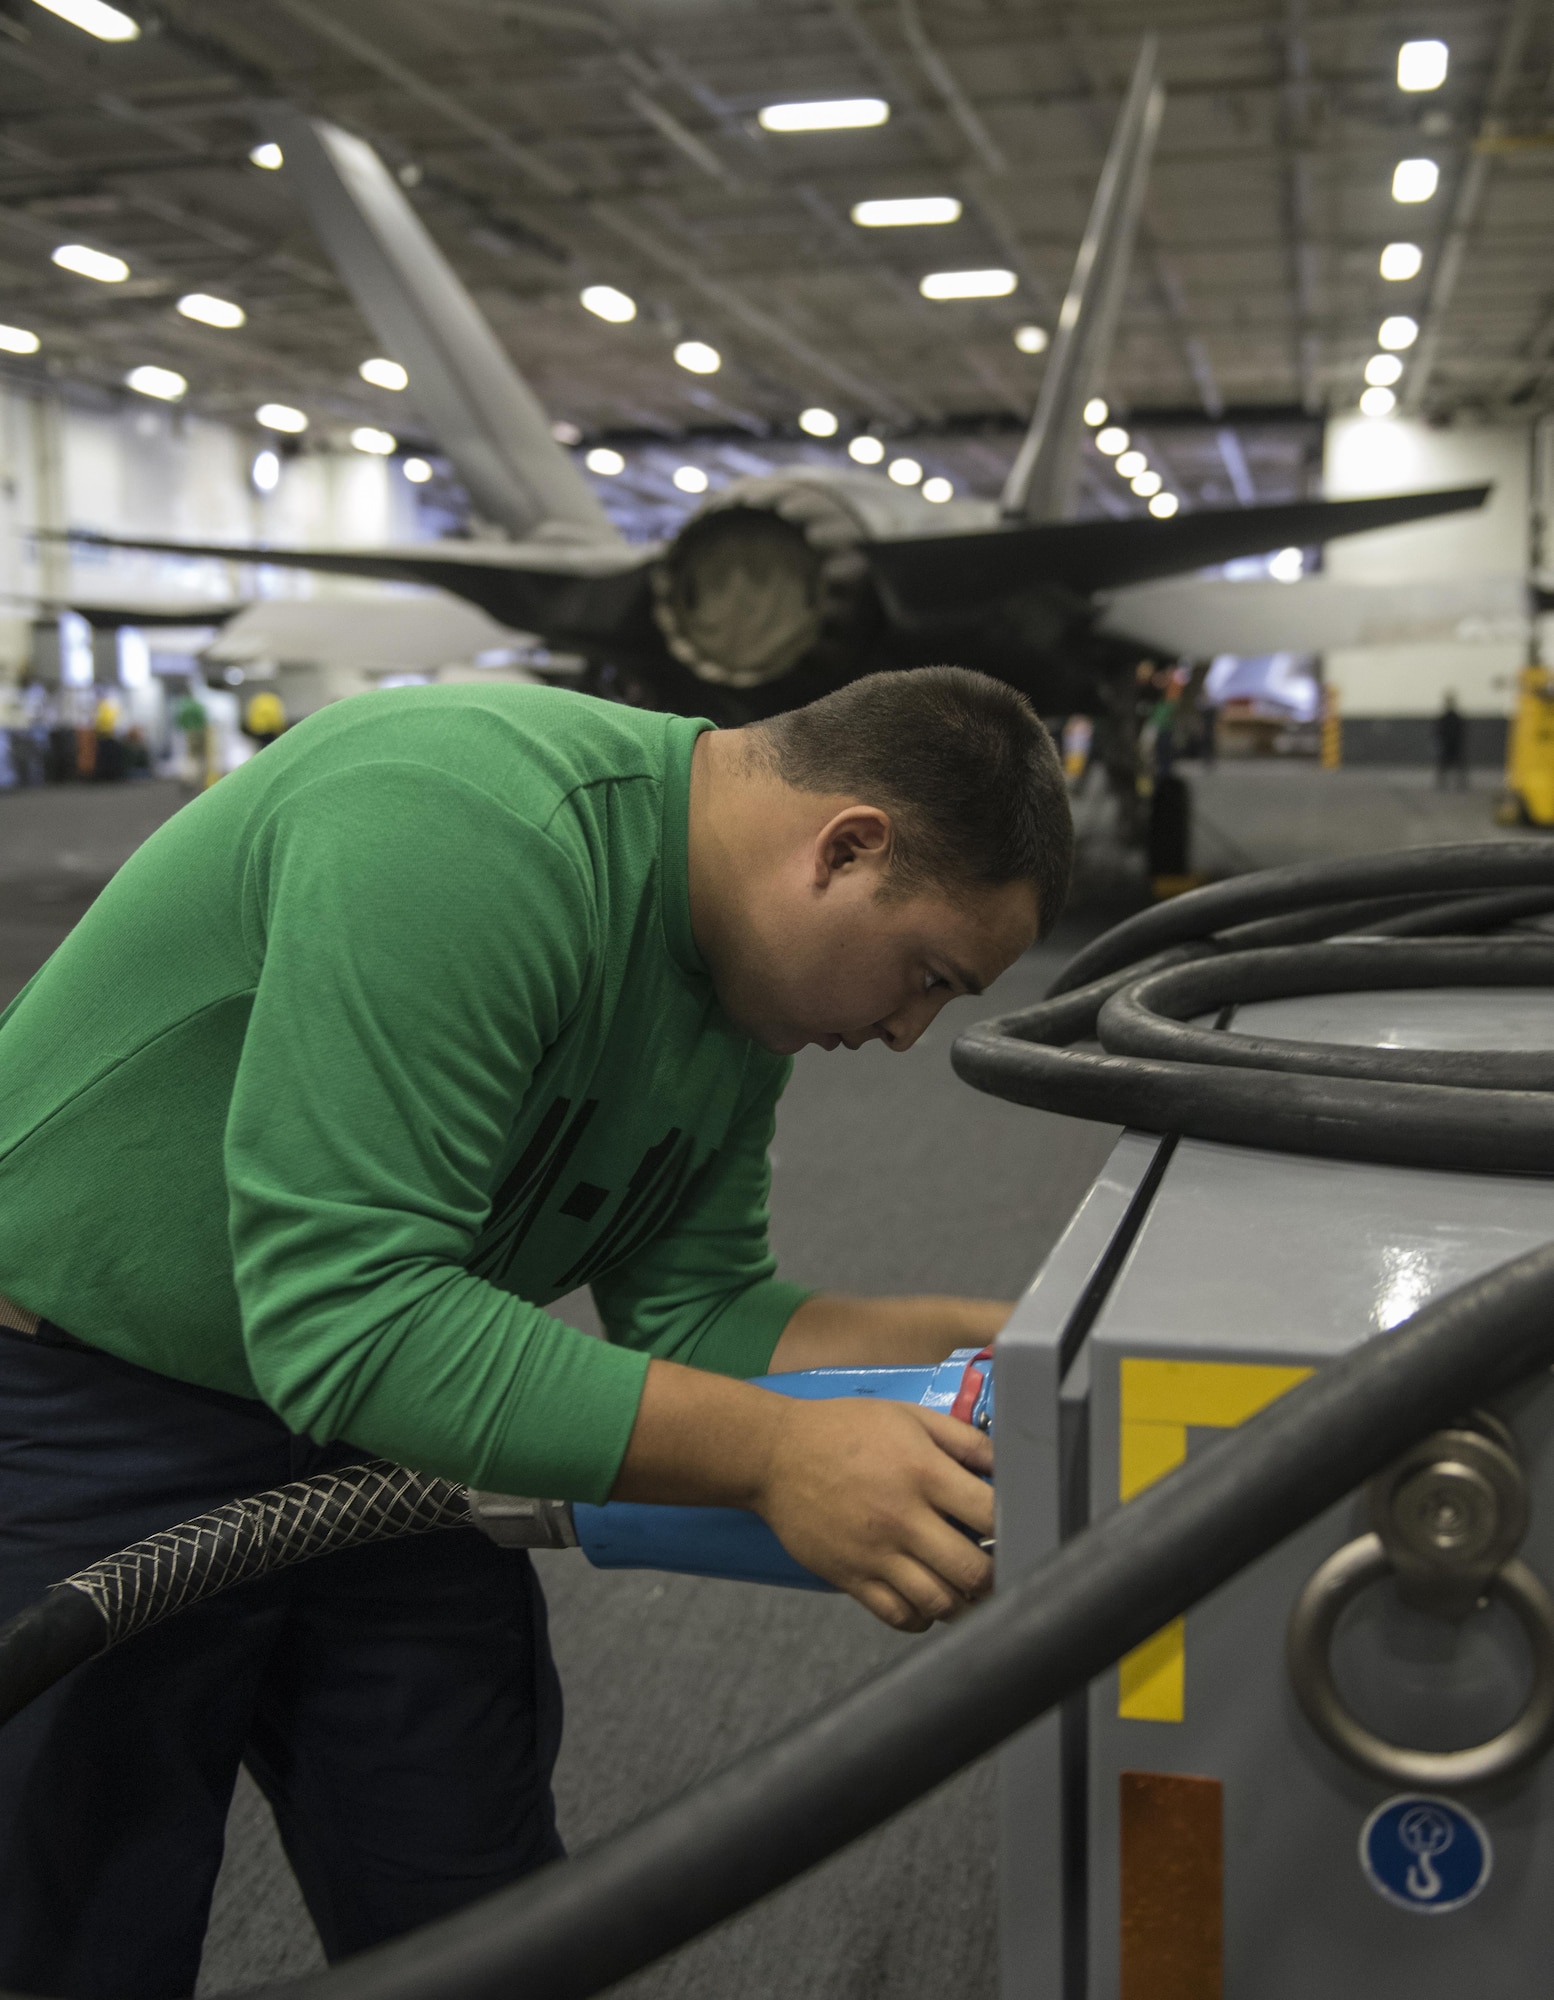 U.S. Air Force Airman 1st Class Elizandro Chapa, 33rd Maintenance Squadron aerospace ground equipment journeyman, connects a cable to a ground power cart Sept. 6, 2017, aboard the Nimitz-class aircraft carrier USS Abraham Lincoln (CVN 72). Two Airmen and two Sailors from 33rd MXS qualified Abraham Lincoln Sailors to operate F-35 support equipment bringing the U.S. Navy one step closer to initial operations capability. (U.S. Air Force photo by Staff Sgt. Peter Thompson/Released)